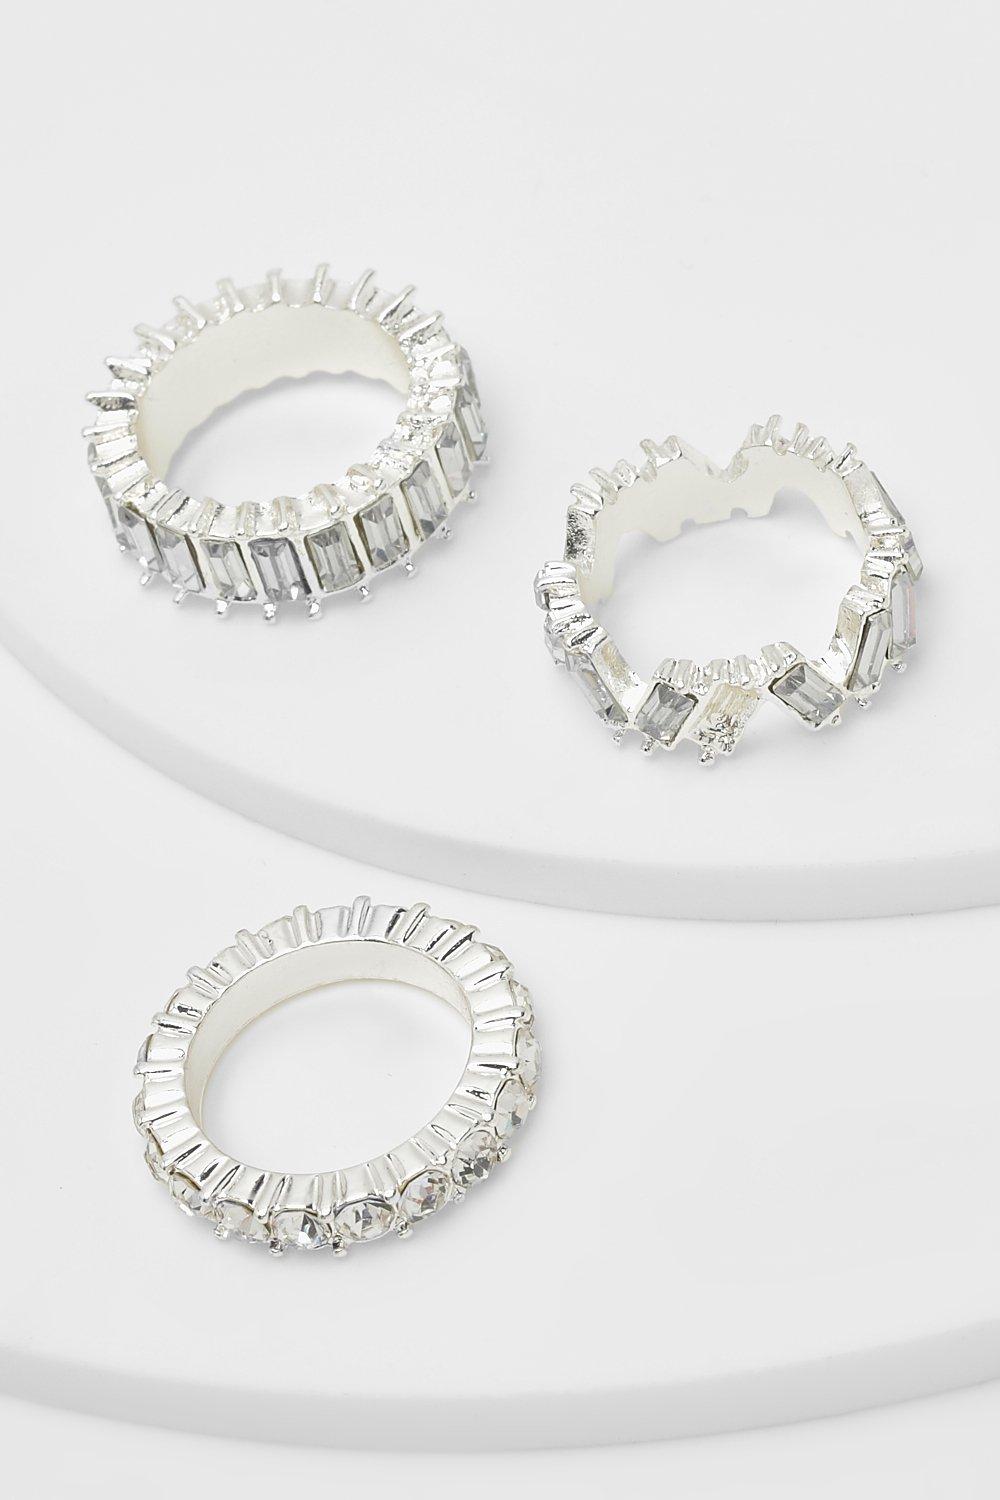 Boohoo Diamante Rings 3 Pack- Grey  - Size: ONE SIZE